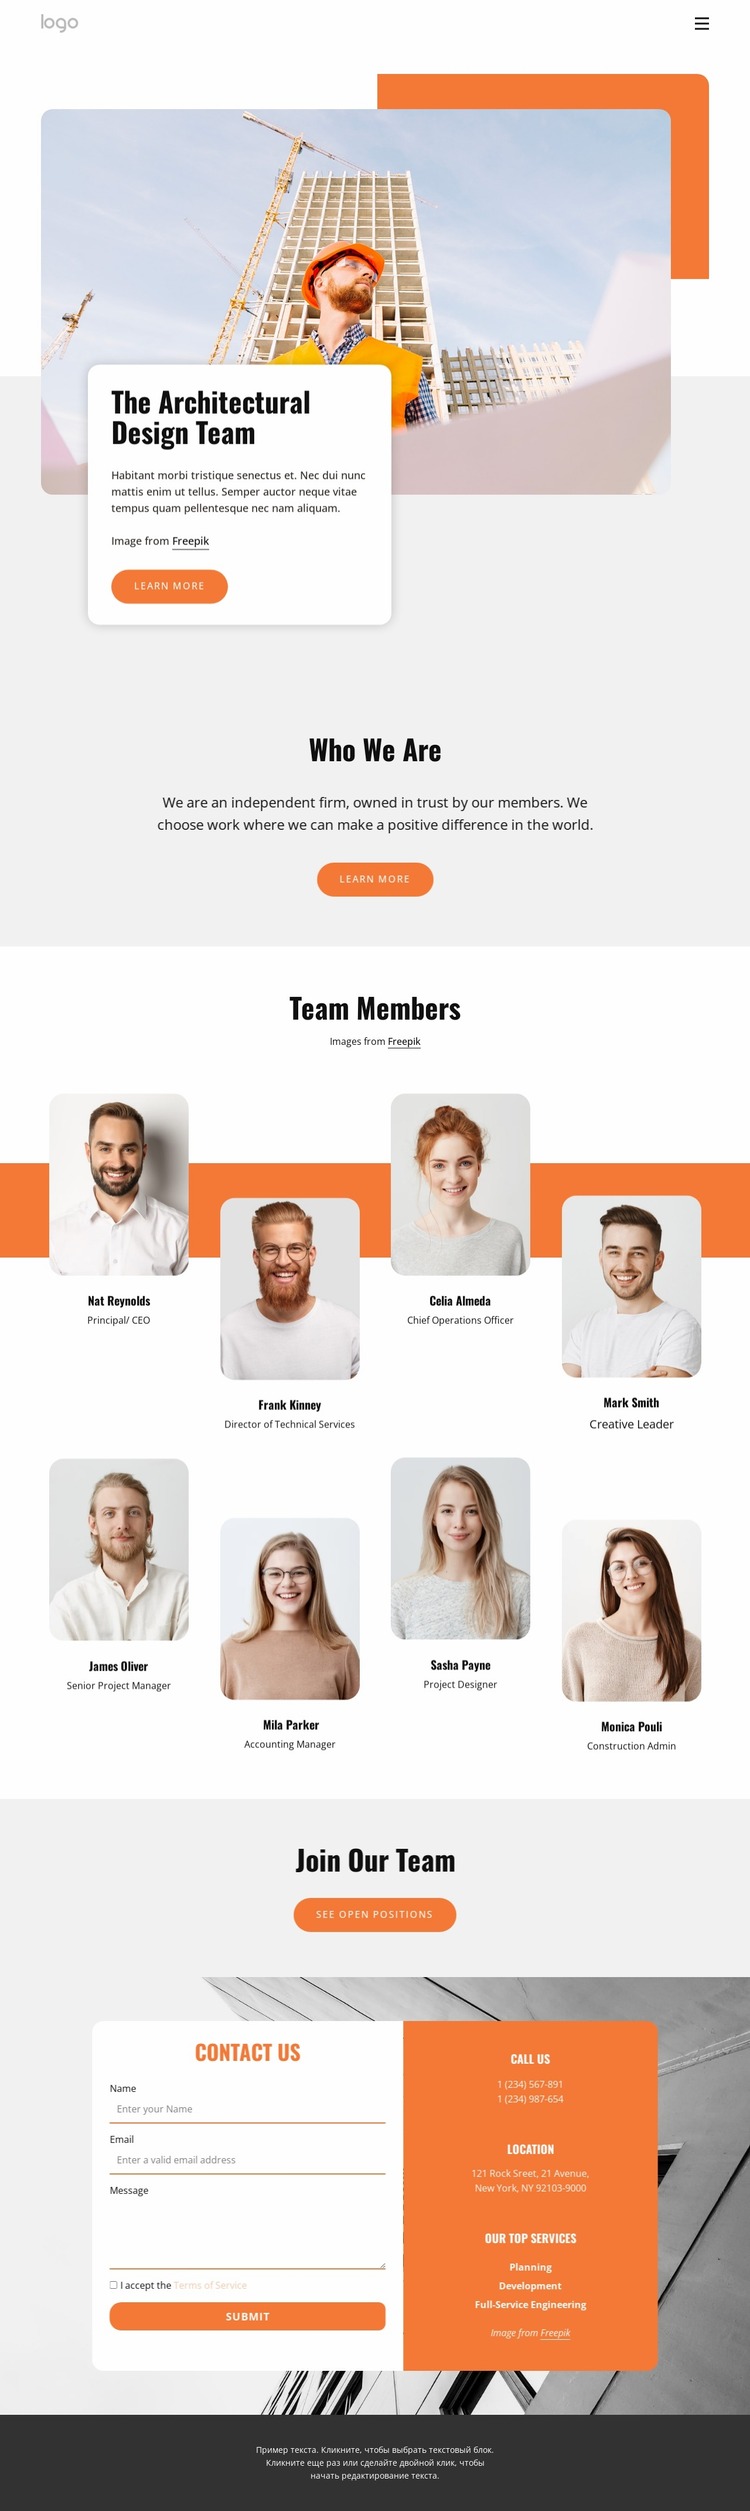 The planning firm with 53 offices and 7000+ professionals Website Mockup